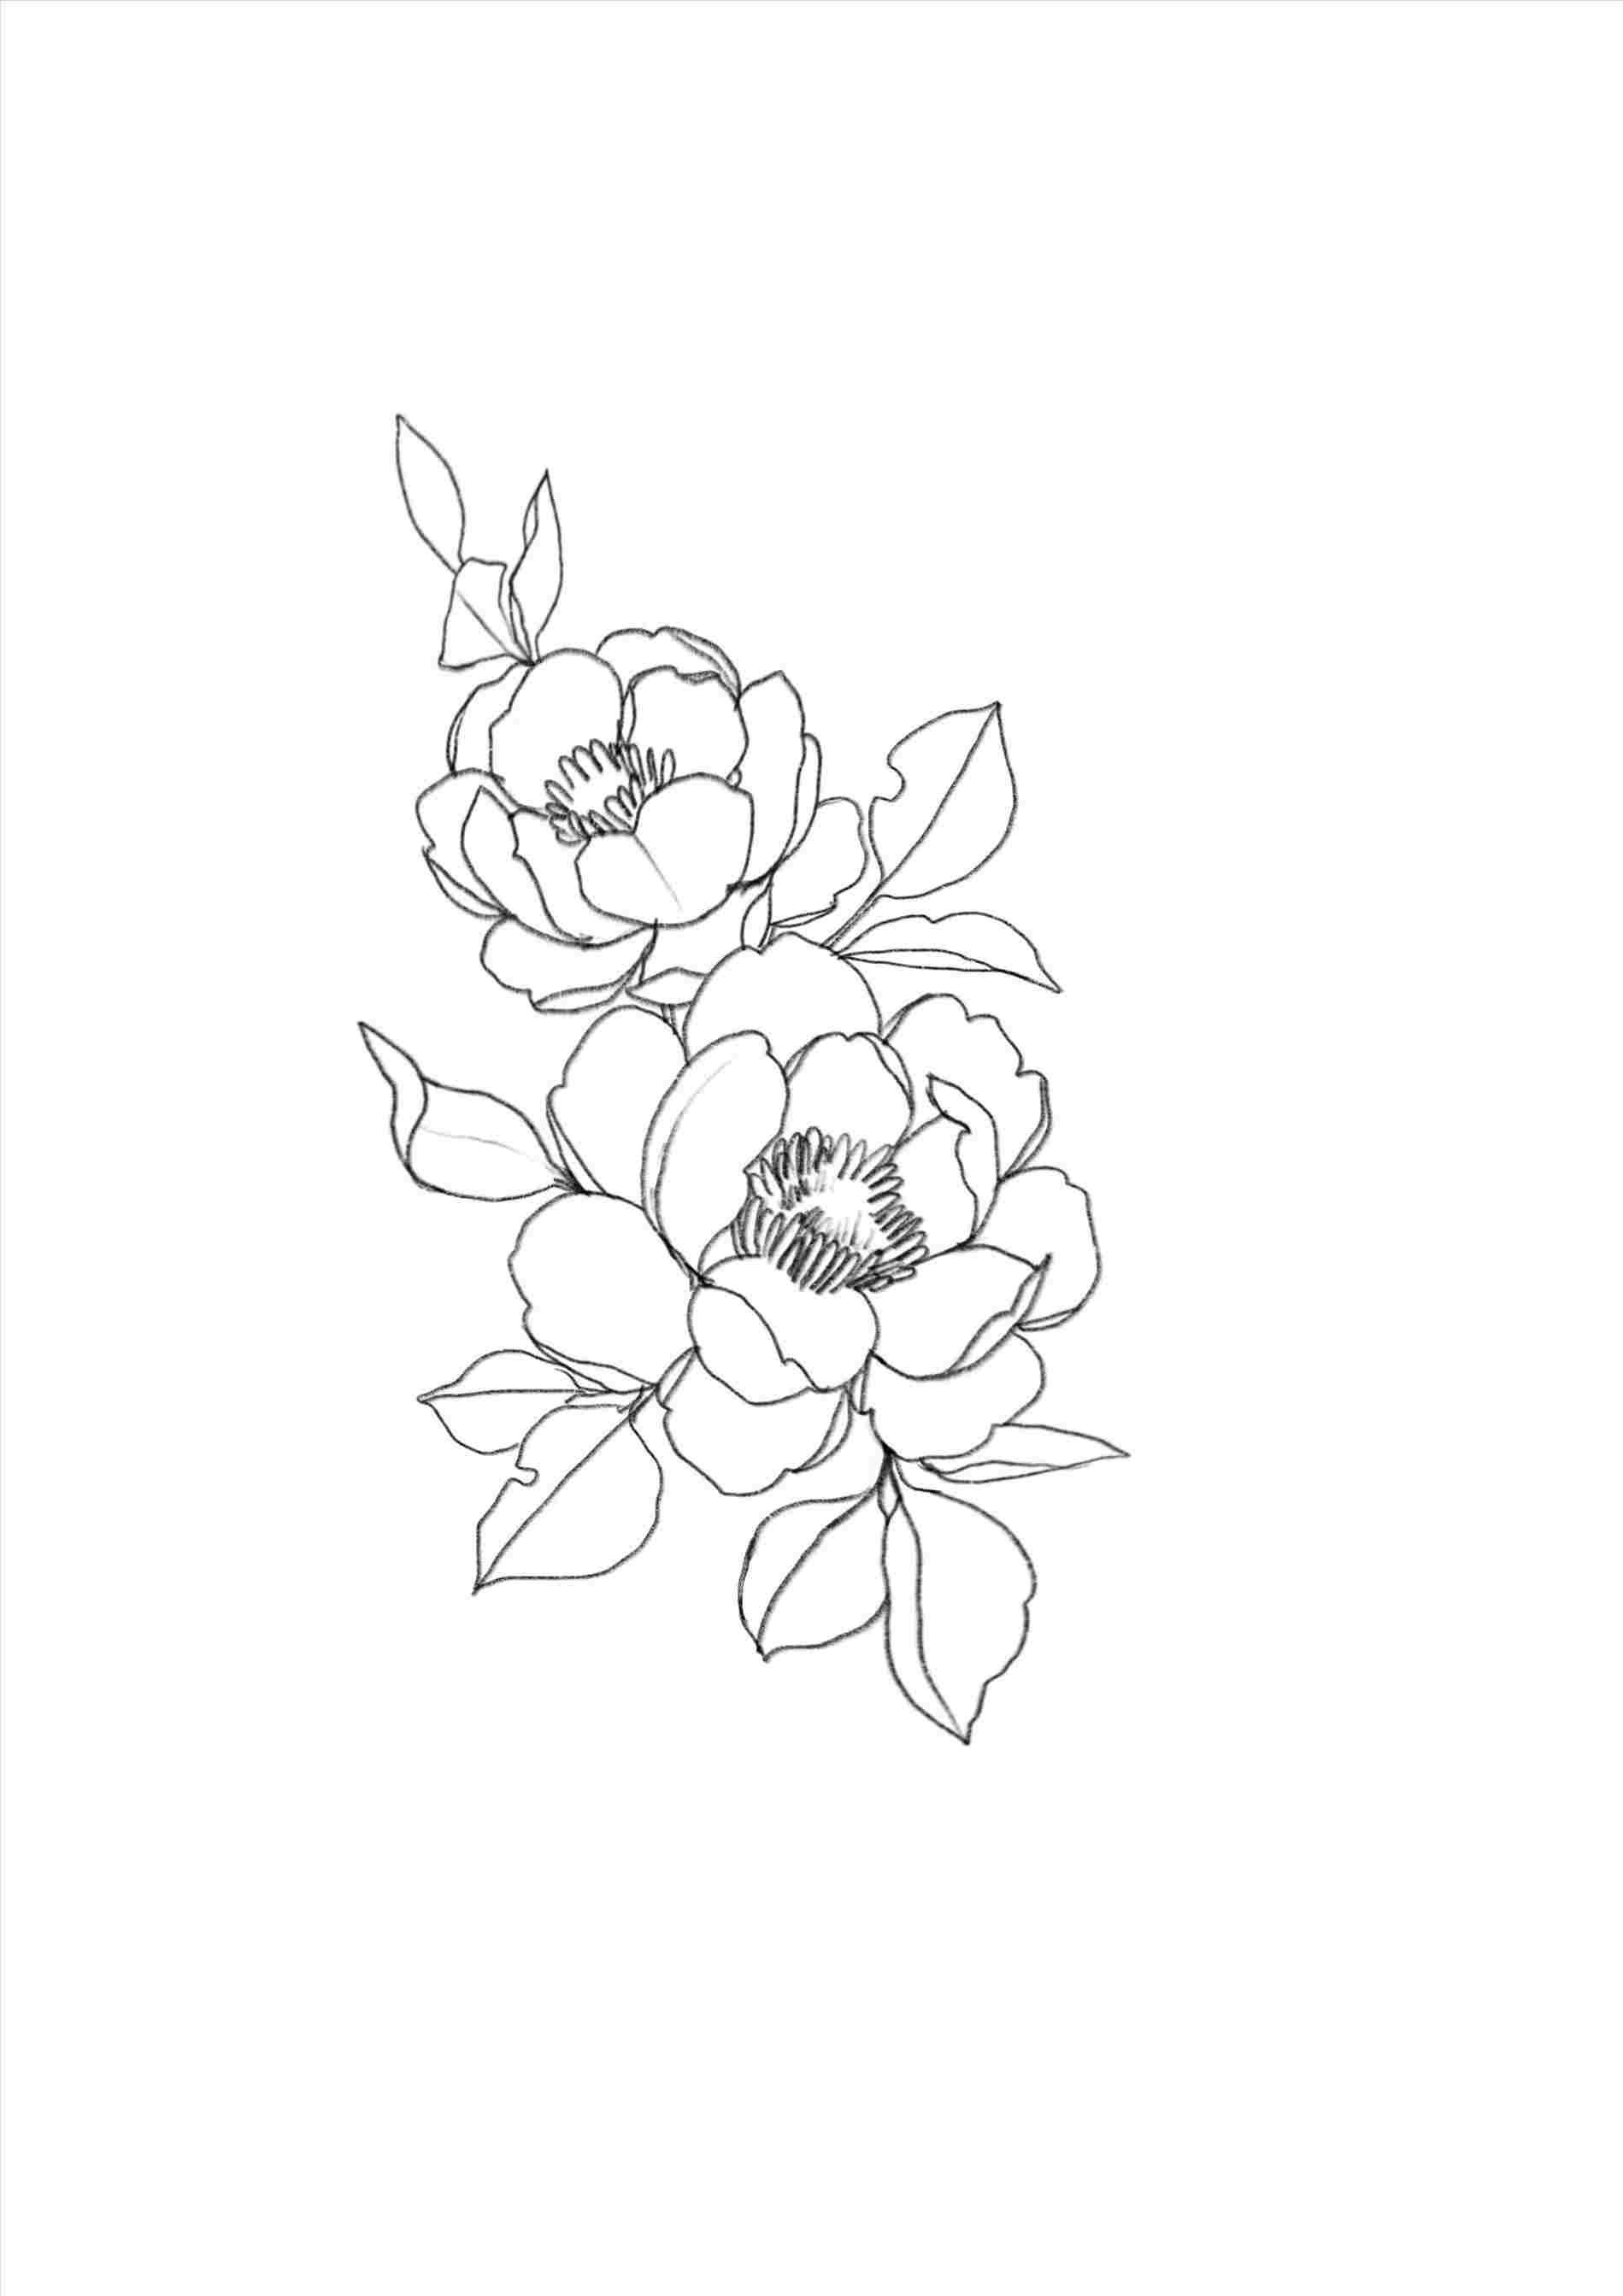 Aesthetic Flower Drawing Hand drawn Sketch